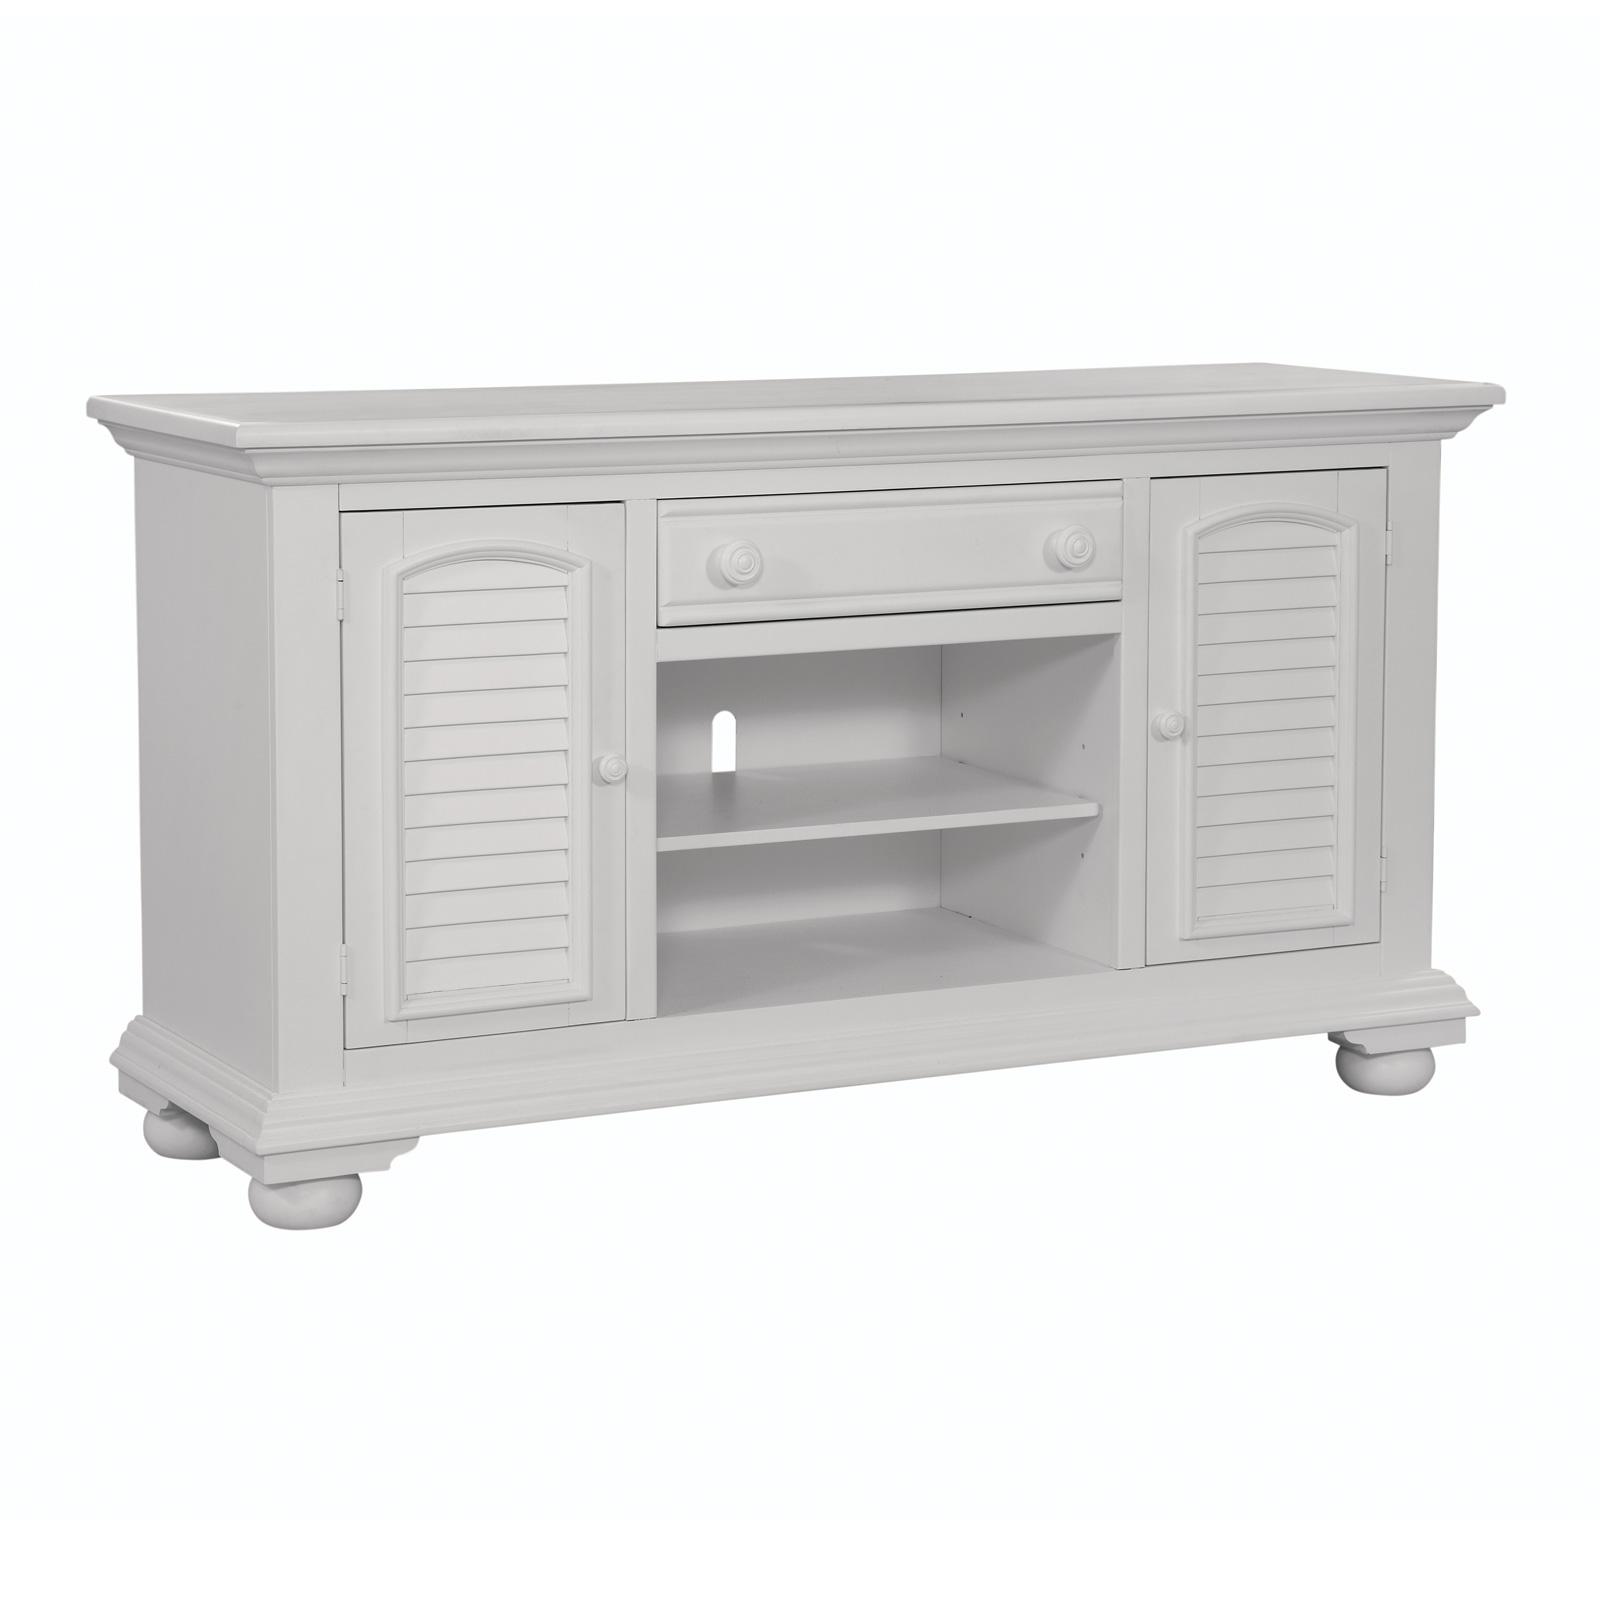 Cottage Tv Console COTTAGE 6510-216 6510-216 in White 